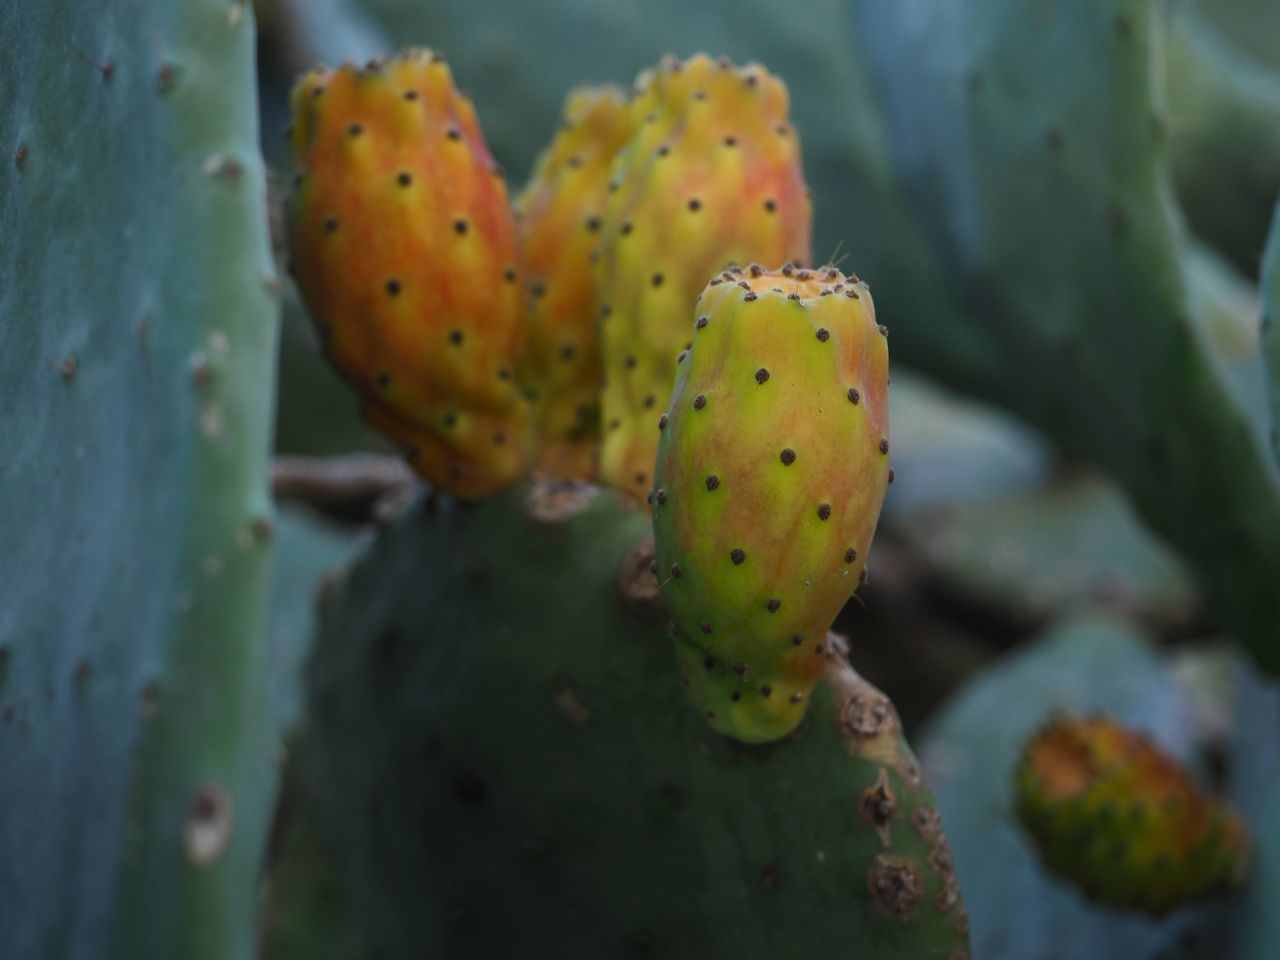 prickly pear cactus, prickly pear, cactus, succulent plant, barbary fig, plant, close-up, nature, macro photography, no people, flower, beauty in nature, growth, thorn, green, yellow, nopal, leaf, outdoors, focus on foreground, produce, spiked, spotted, eastern prickly pear, environment, day, plant stem, water, fruit, animal wildlife, freshness, animal